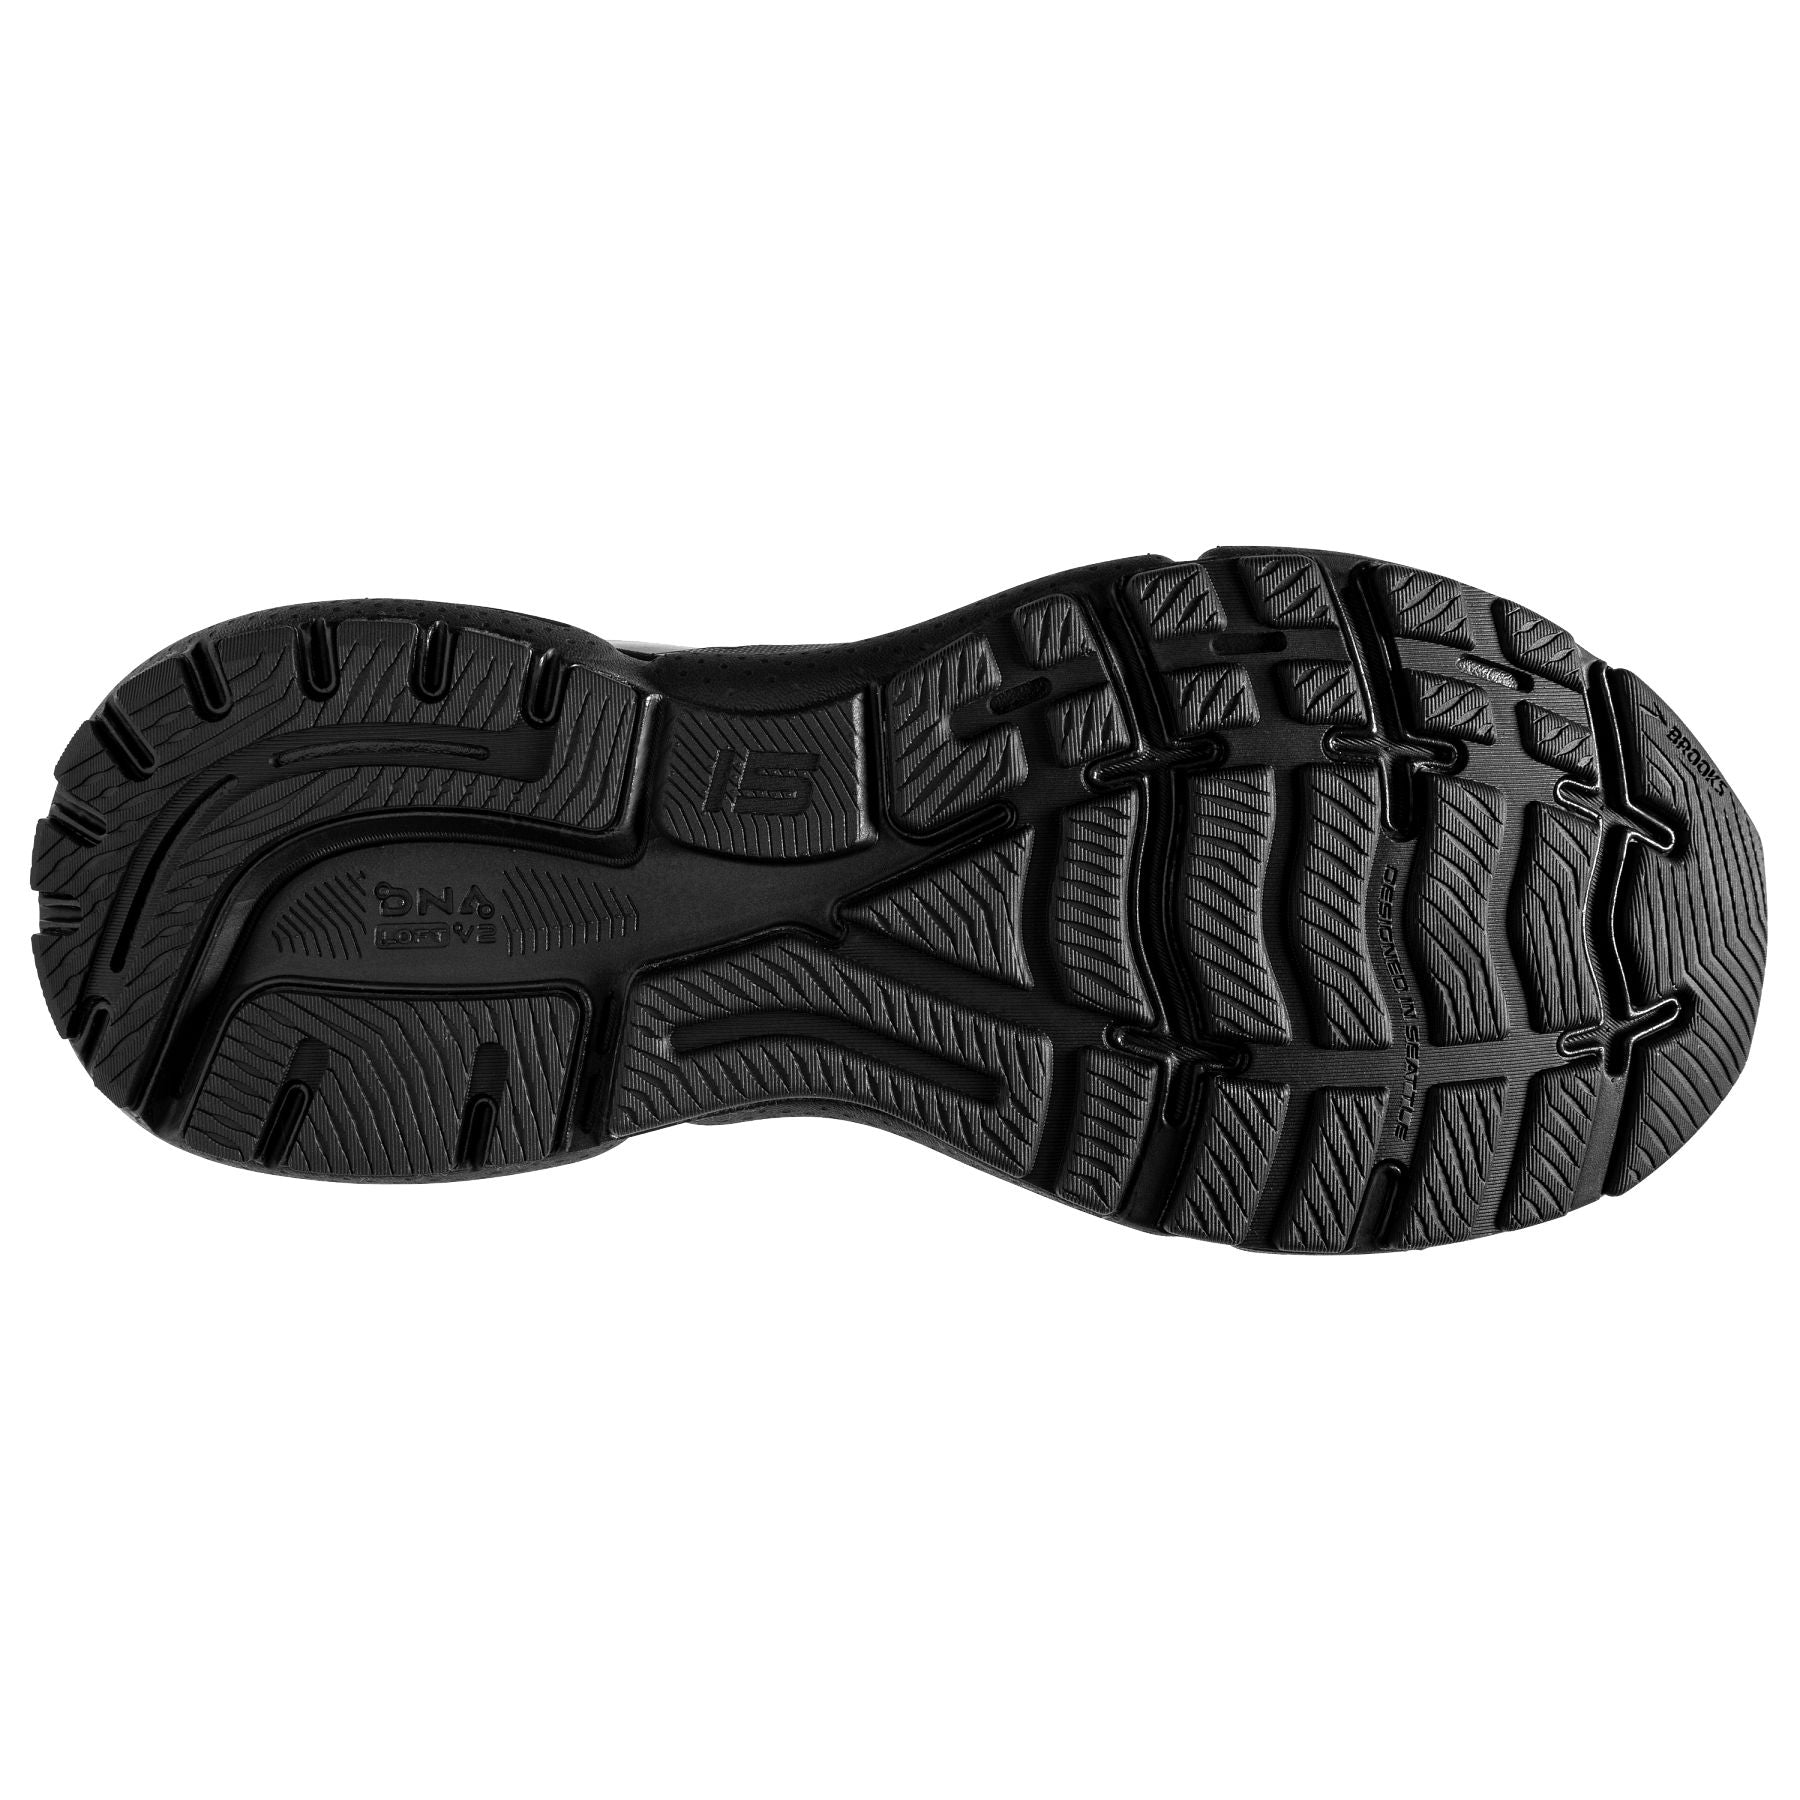 Bottom (outer sole) view of the Women's Ghost 15 in the wide D width, color Black/Black/Ebony